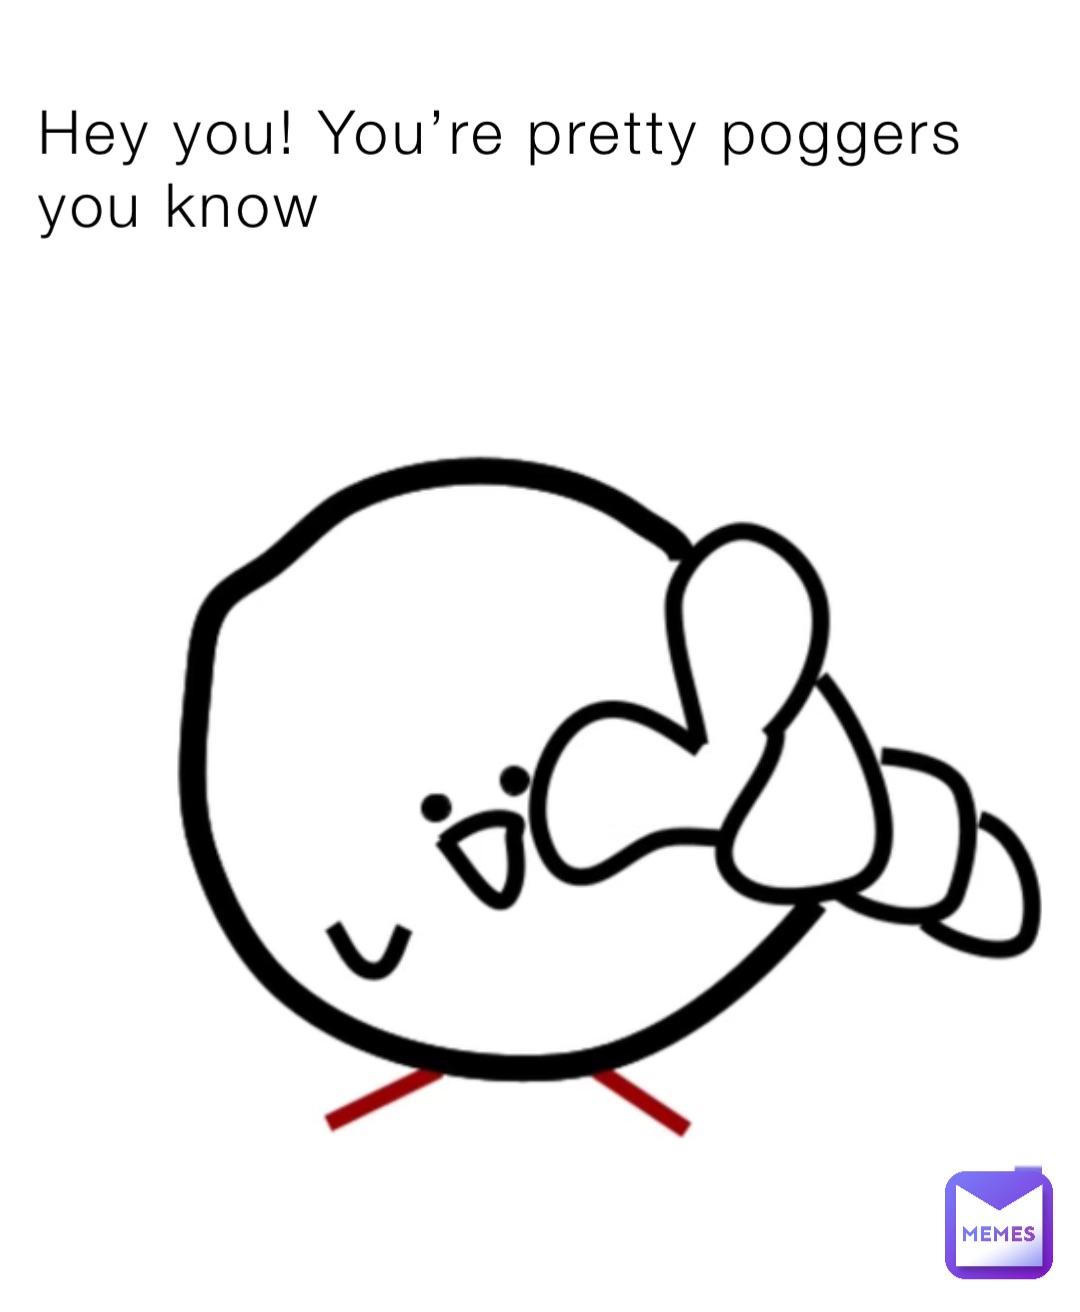 Hey you! You’re pretty poggers you know